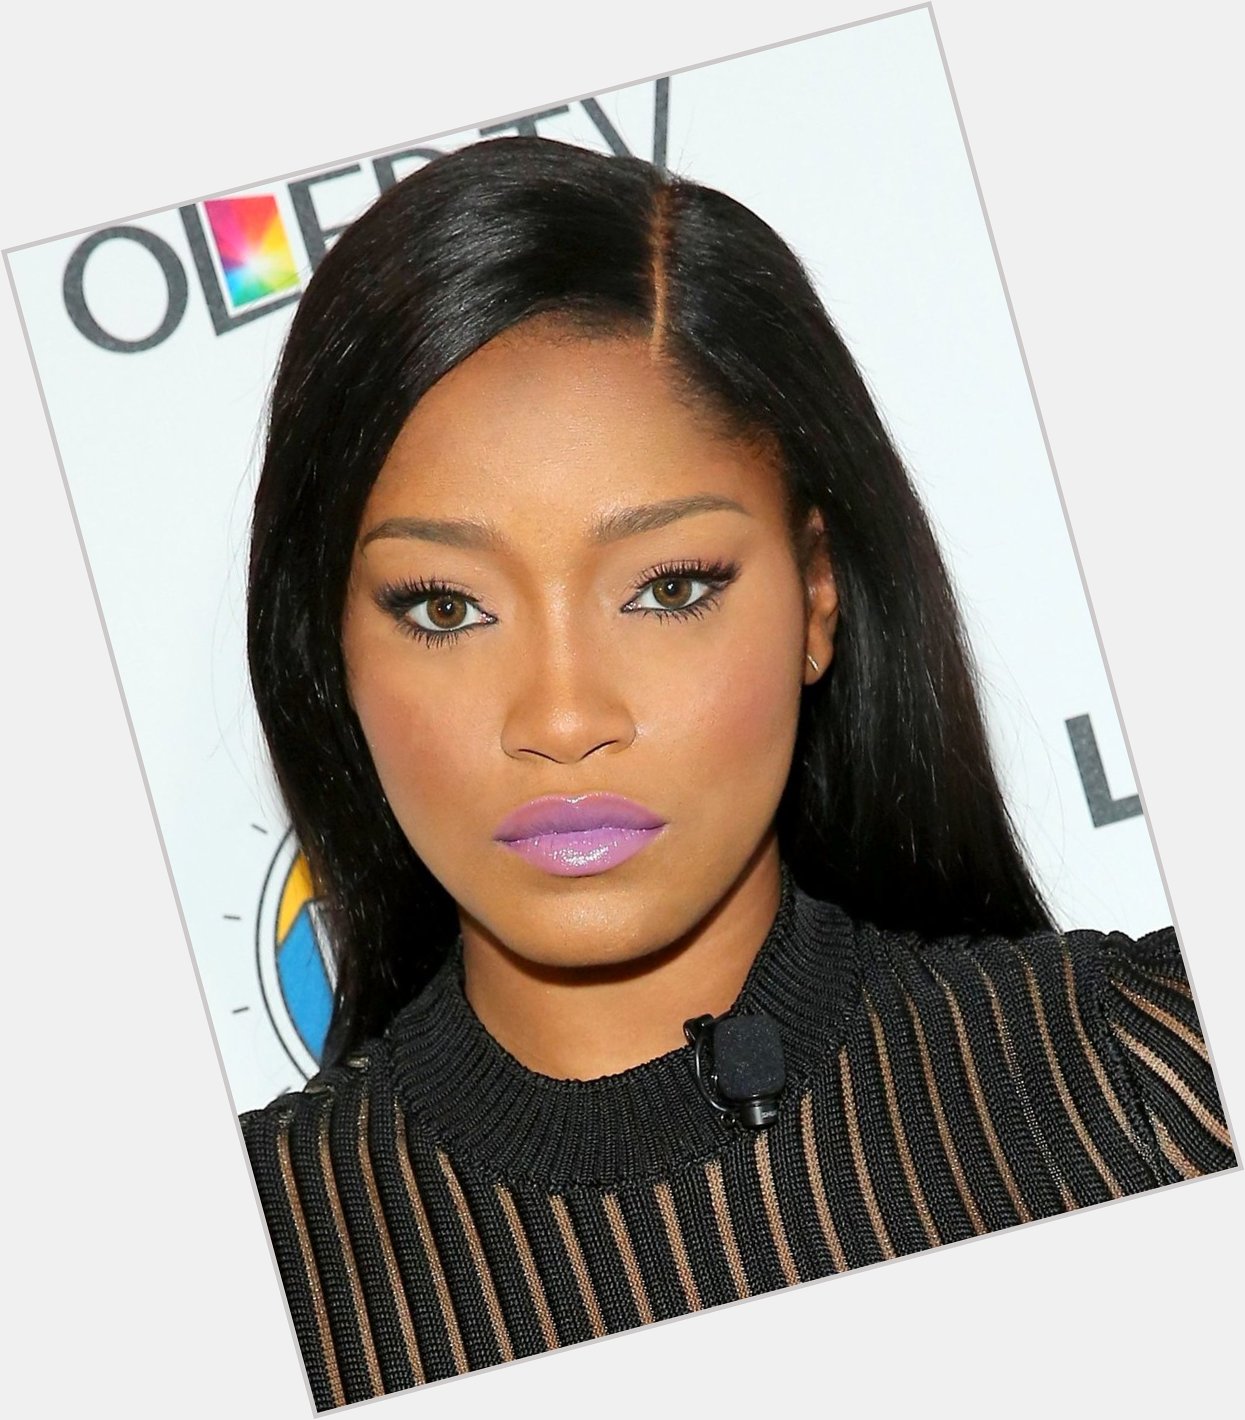 Keke Palmer August 26 Sending Very Happy Birthday Wishes! All the Best! 